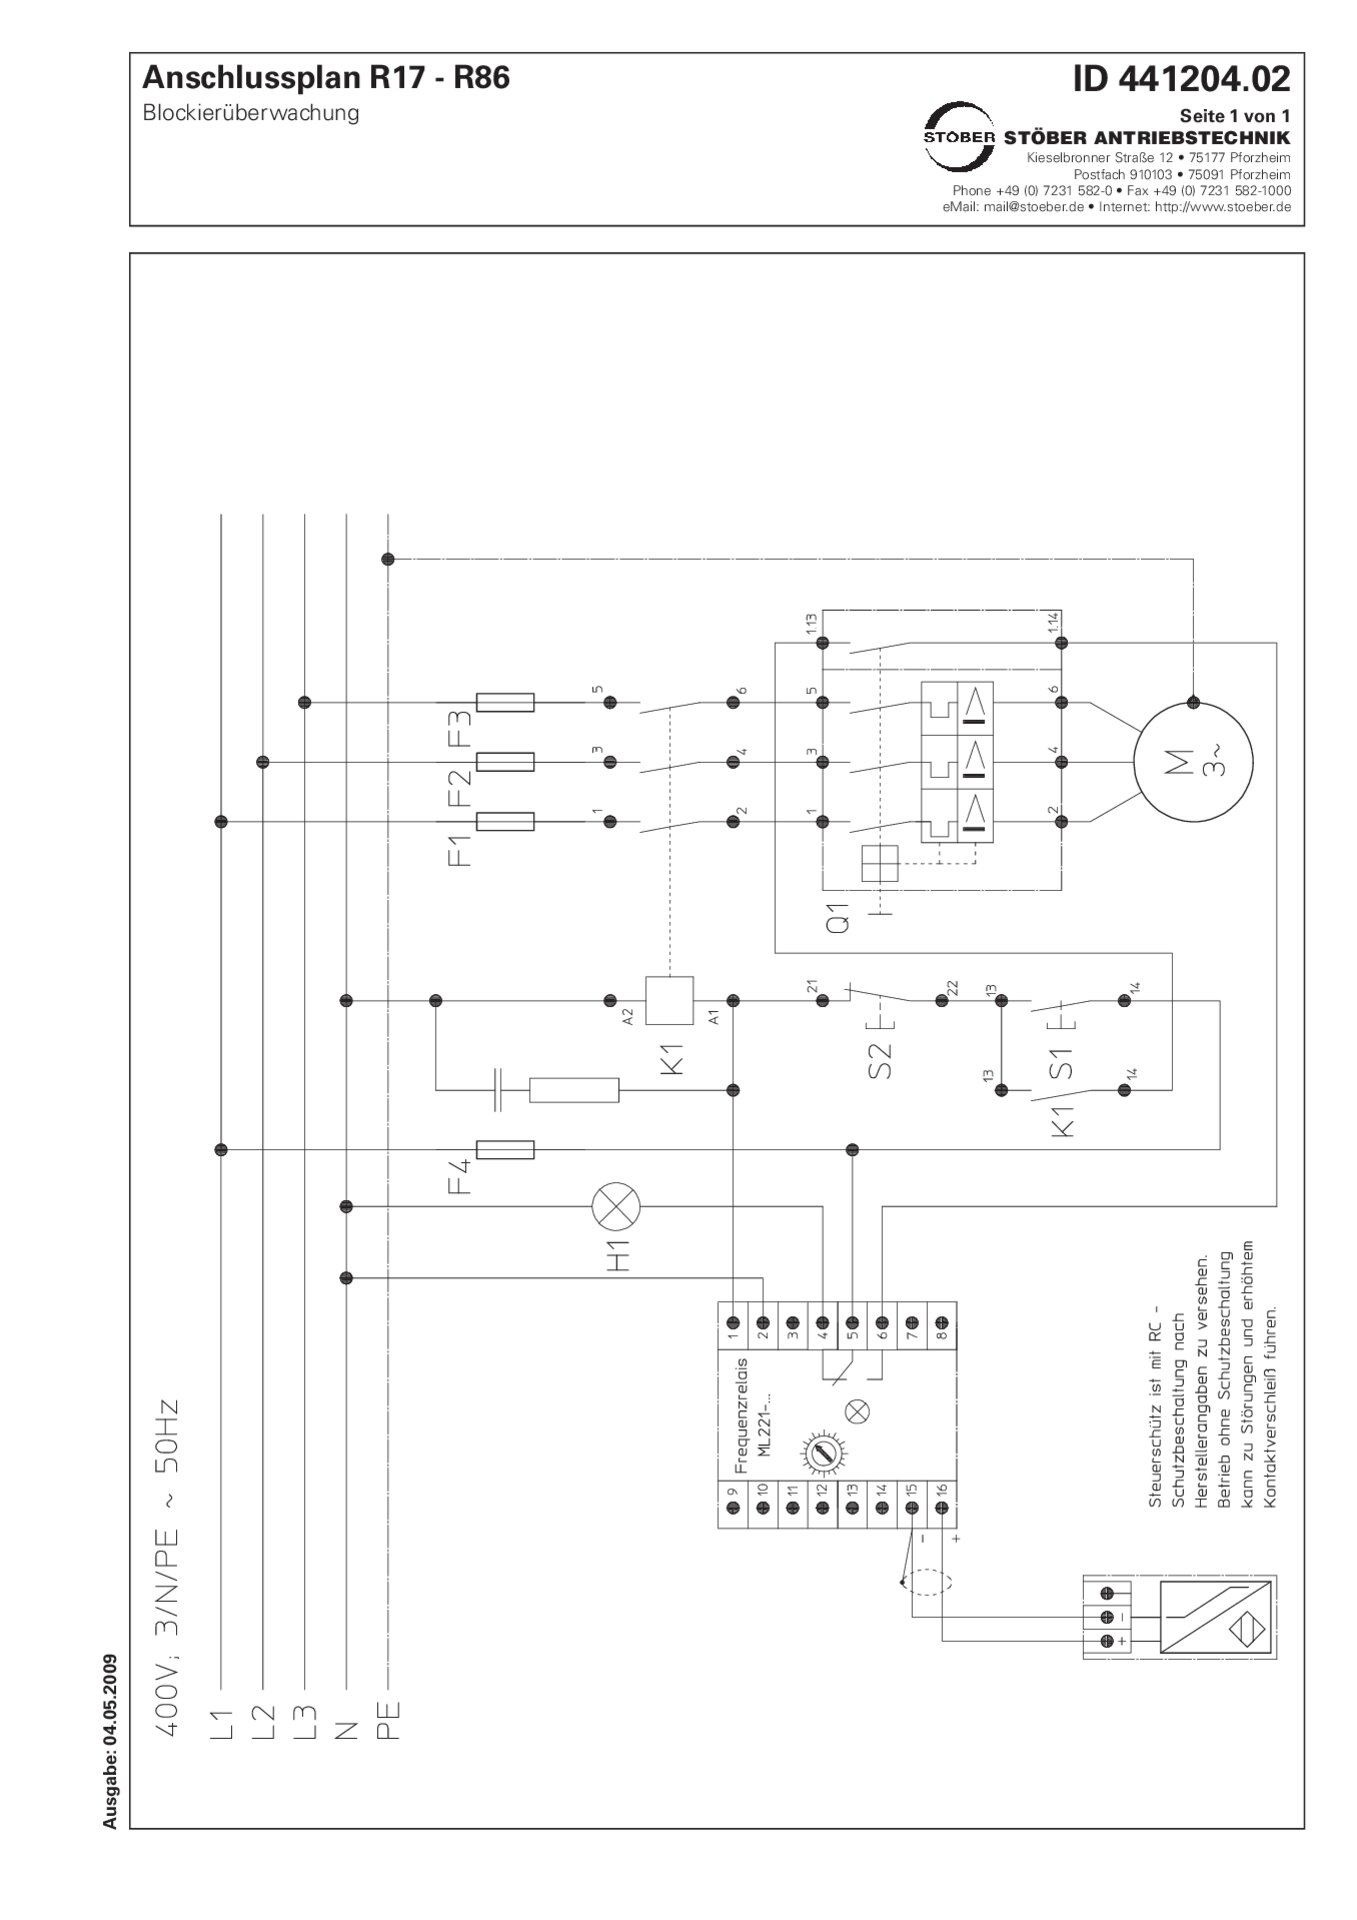 Connection plan R17-R86 Jamming control 230 V